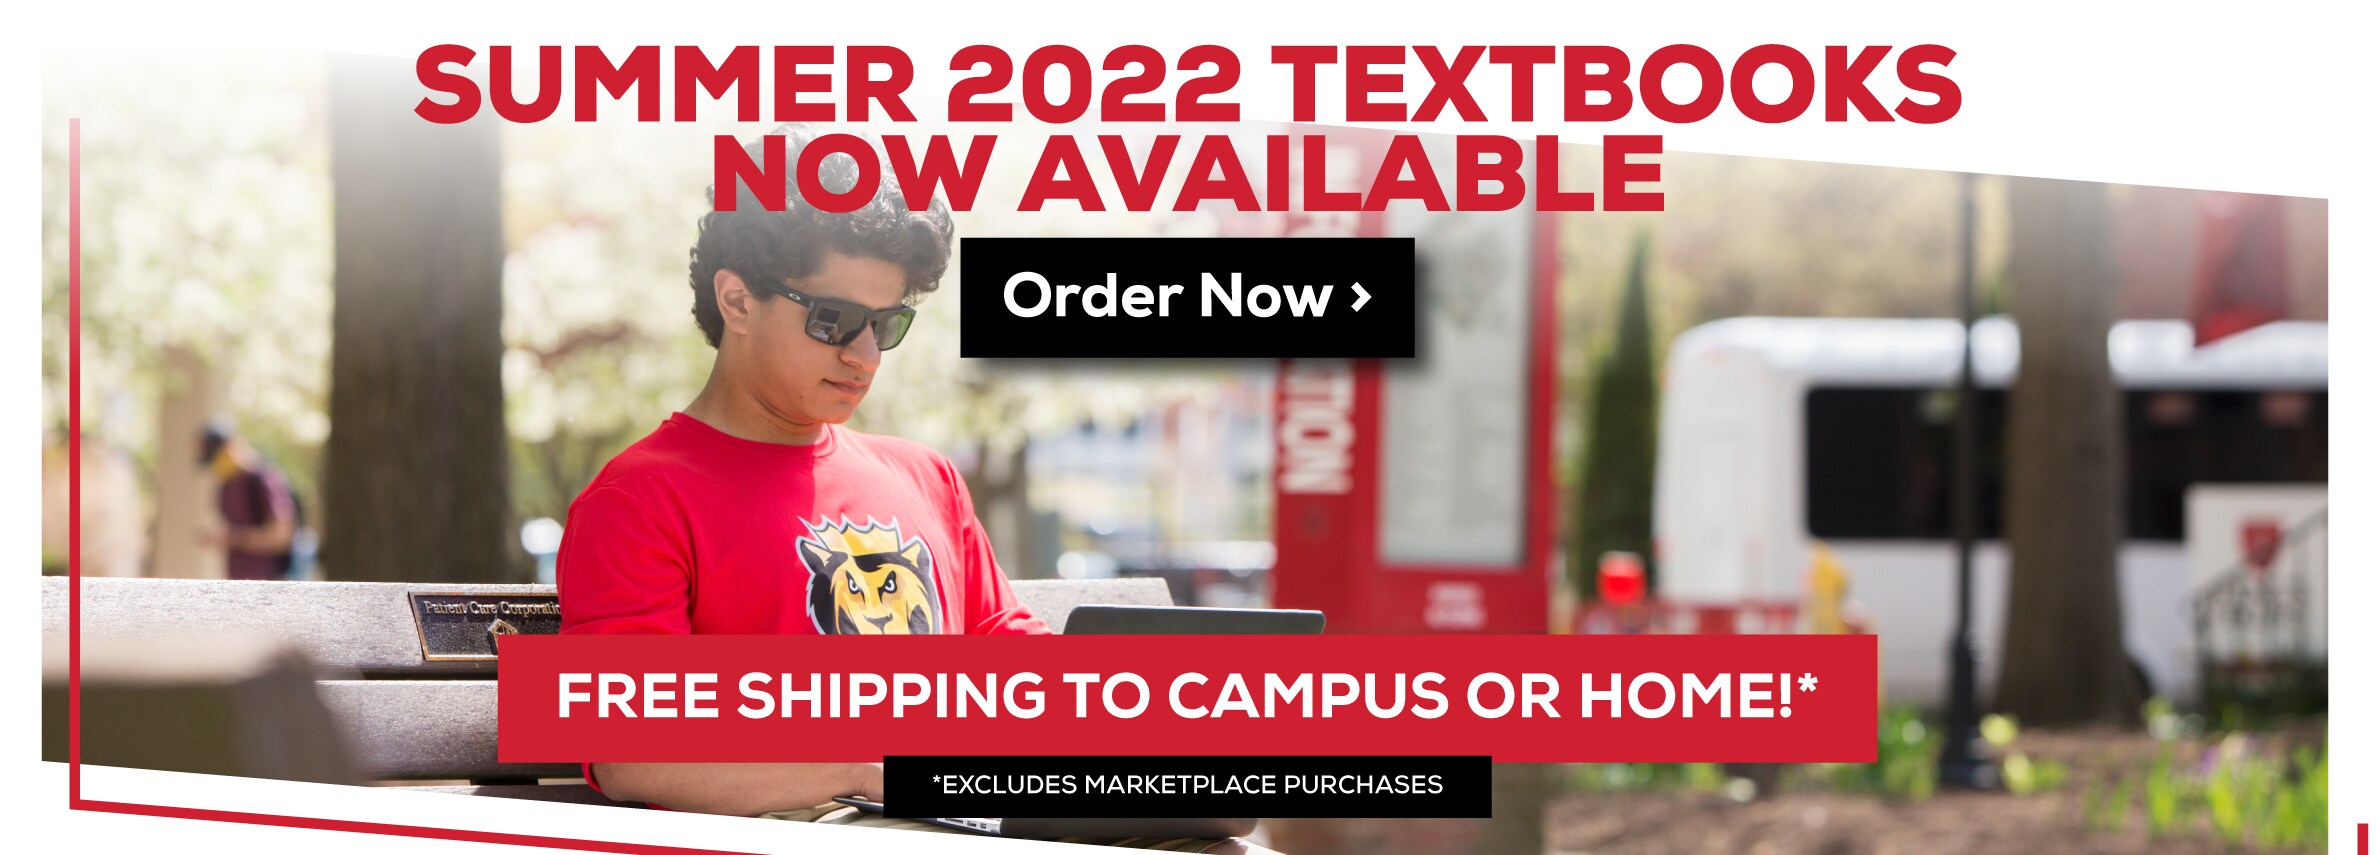 Summer 2022 Textbooks Now Available! Order Now. Free Shipping to Campus or Home!* *Excludes Marketplace Purchases